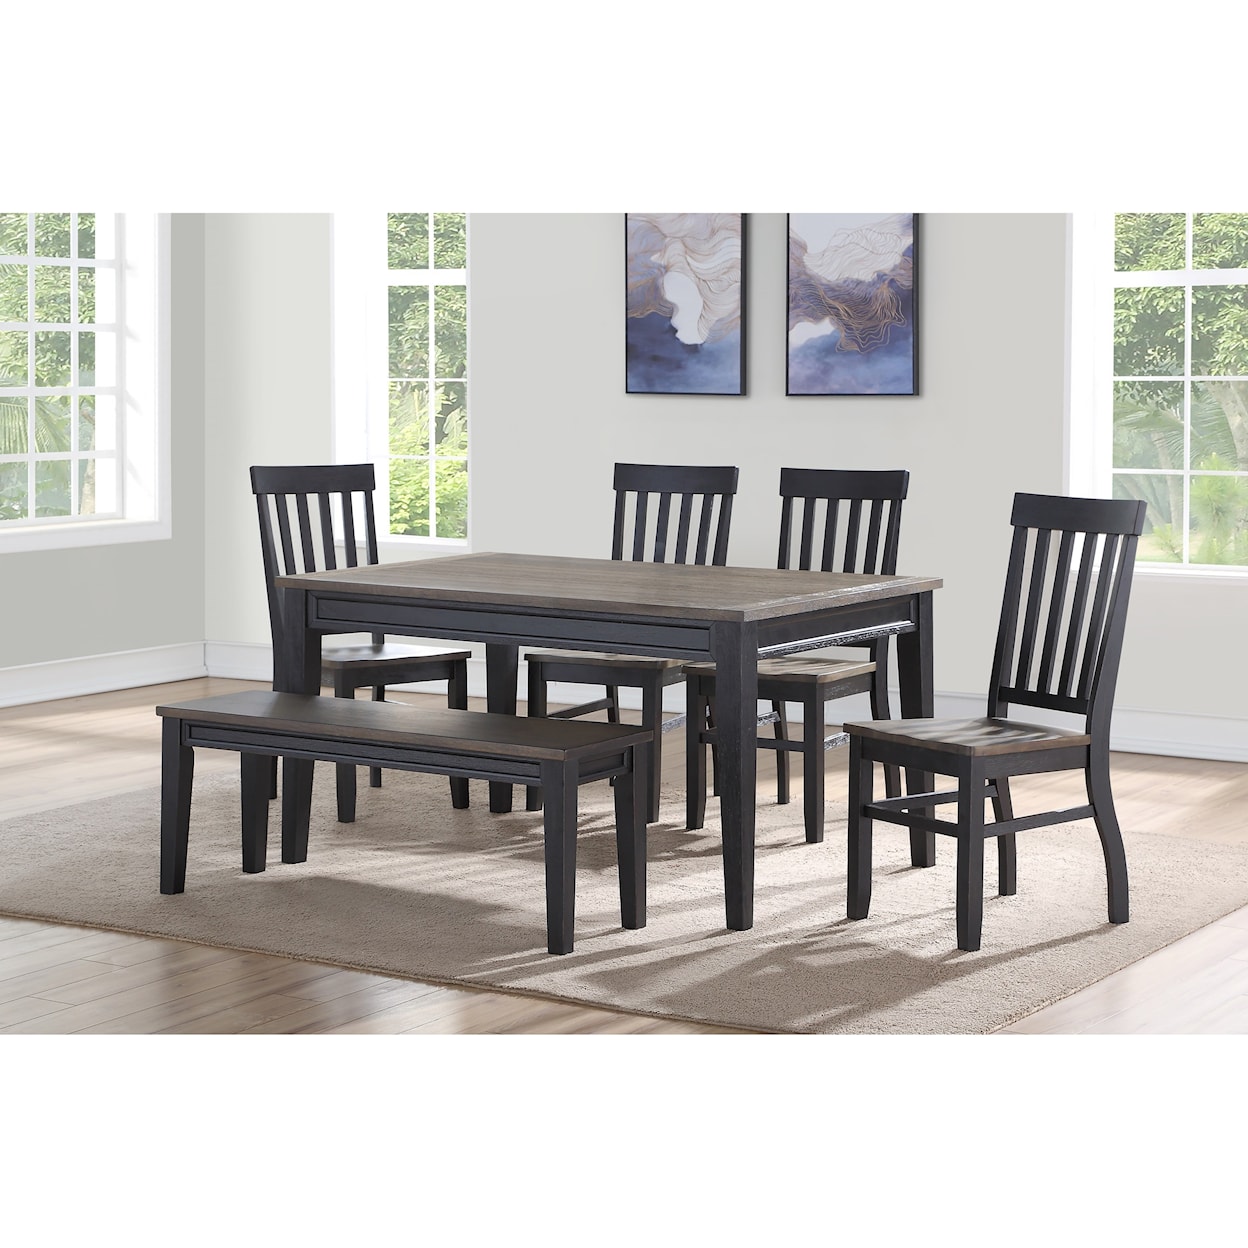 Prime Raven Dining Set with Bench